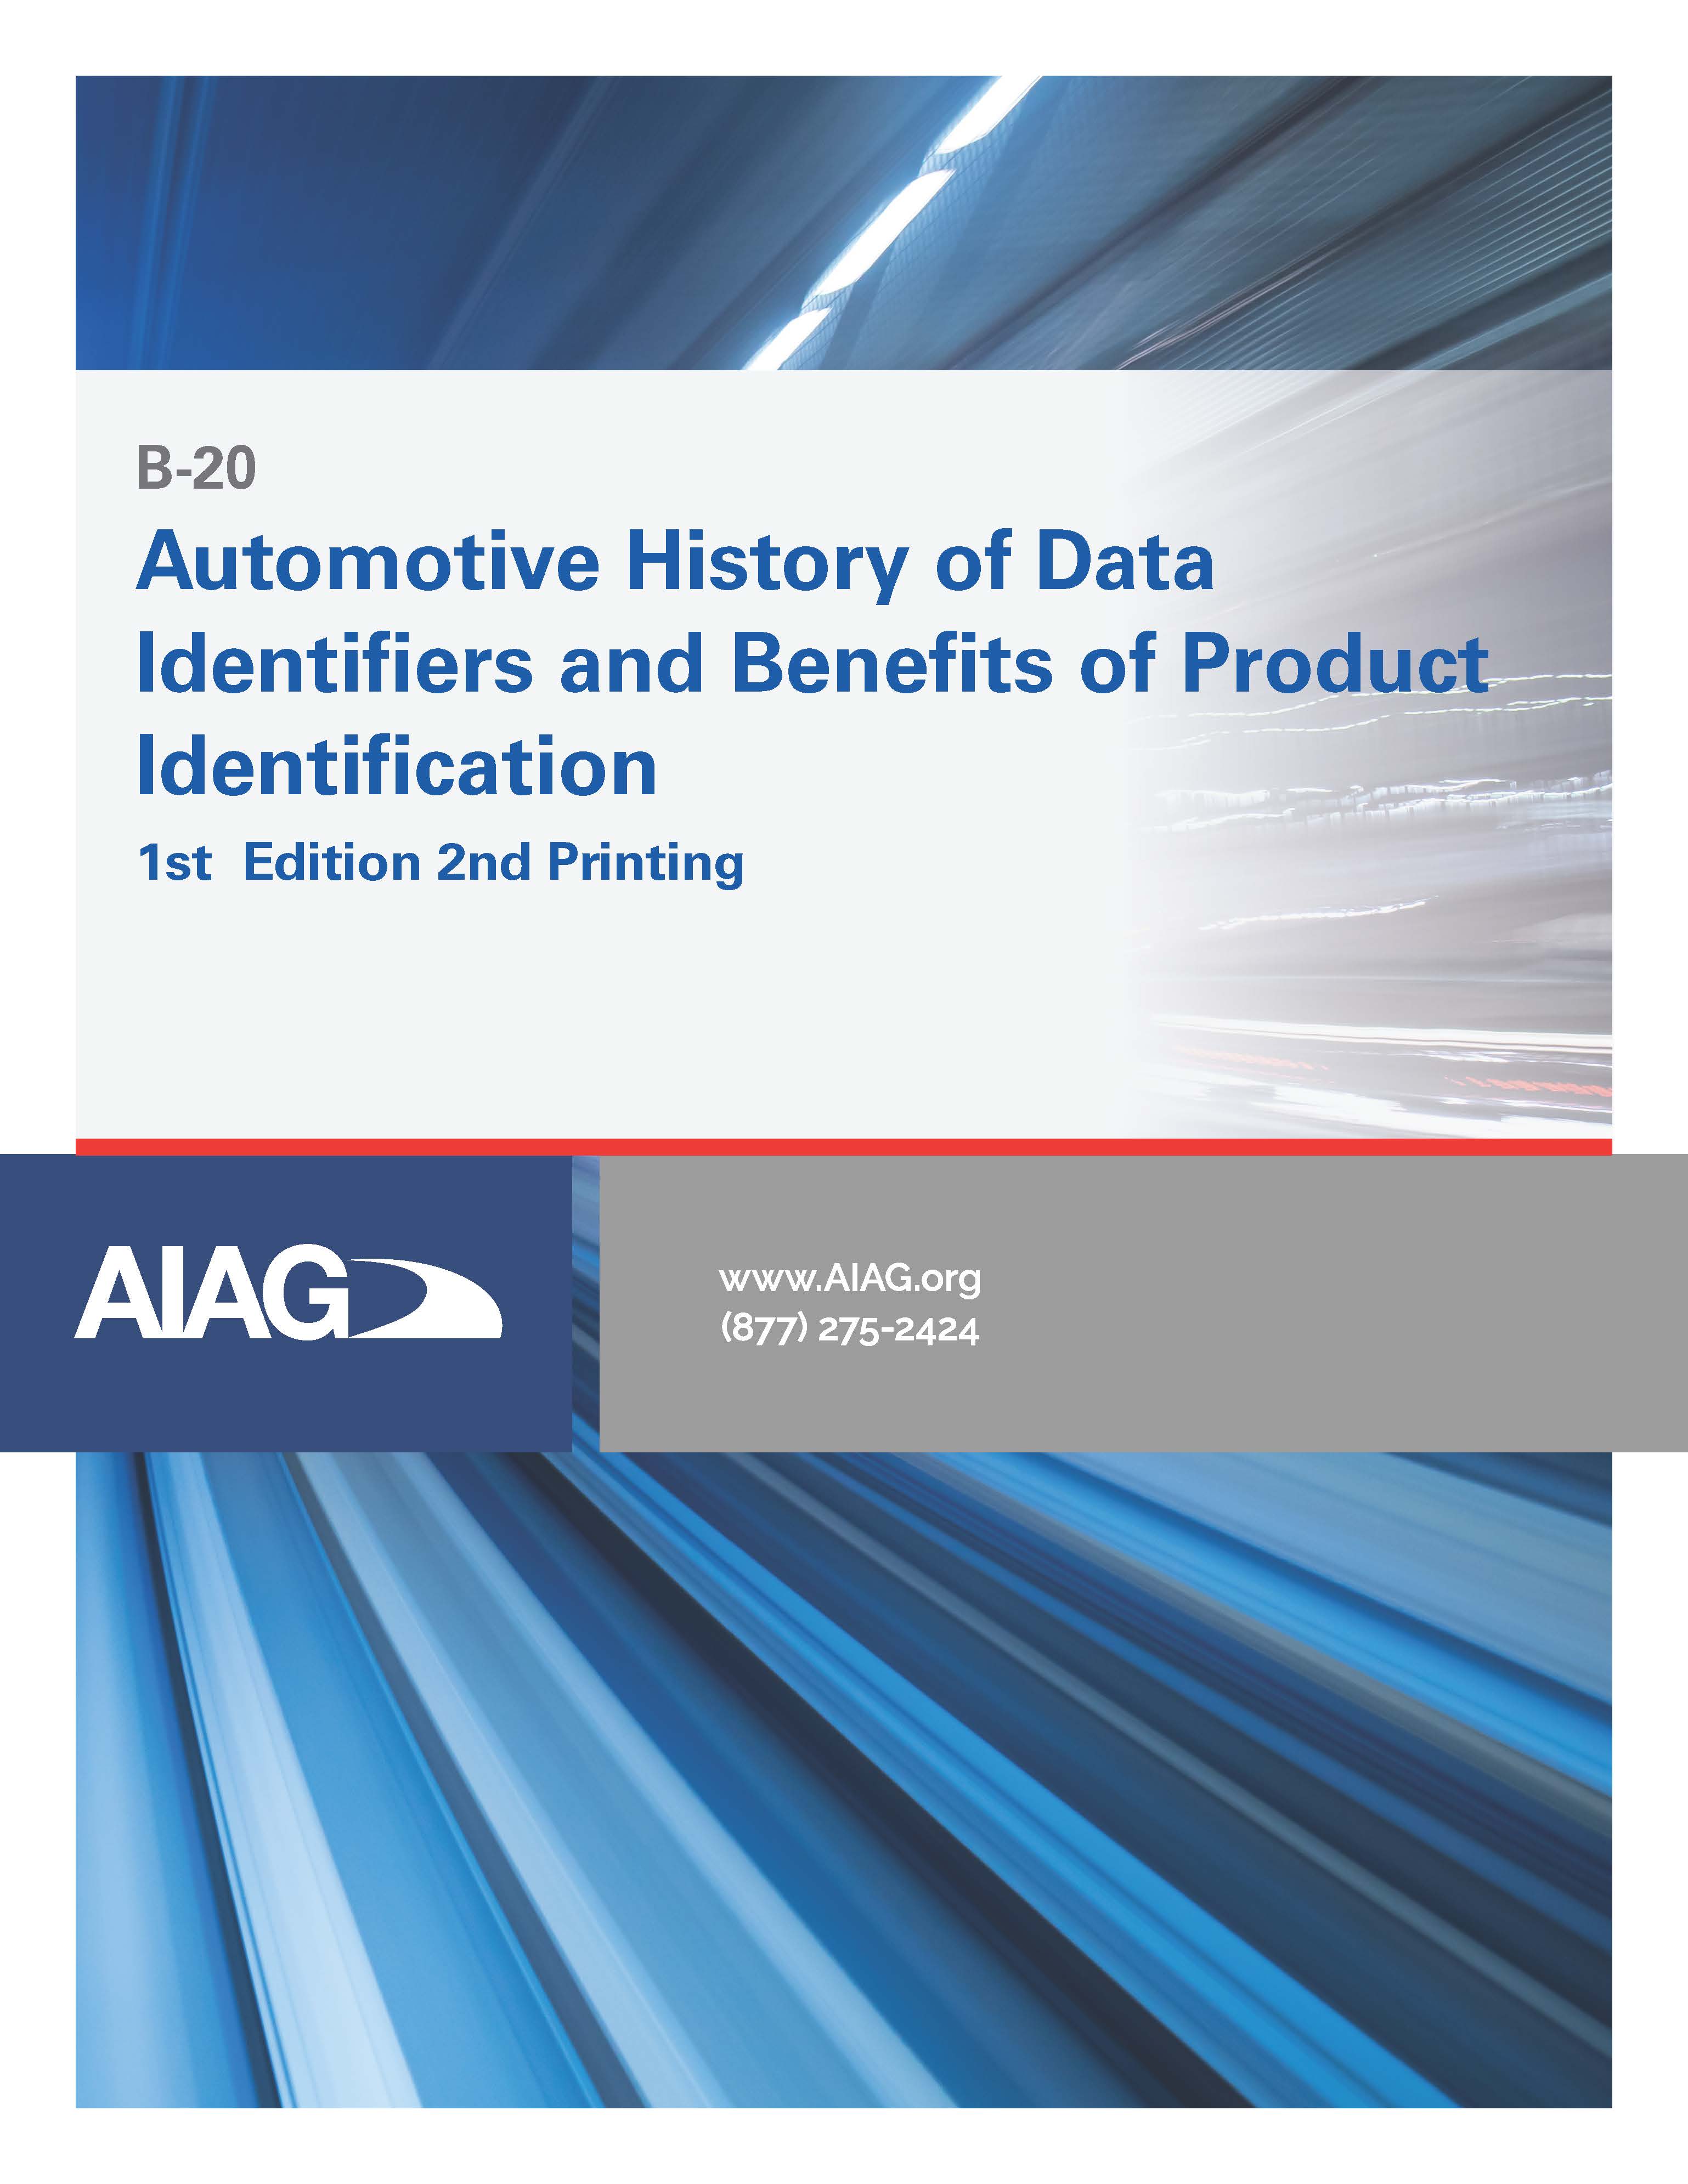 AIAG Automotive History of Data Identifiers (1.1.2023)